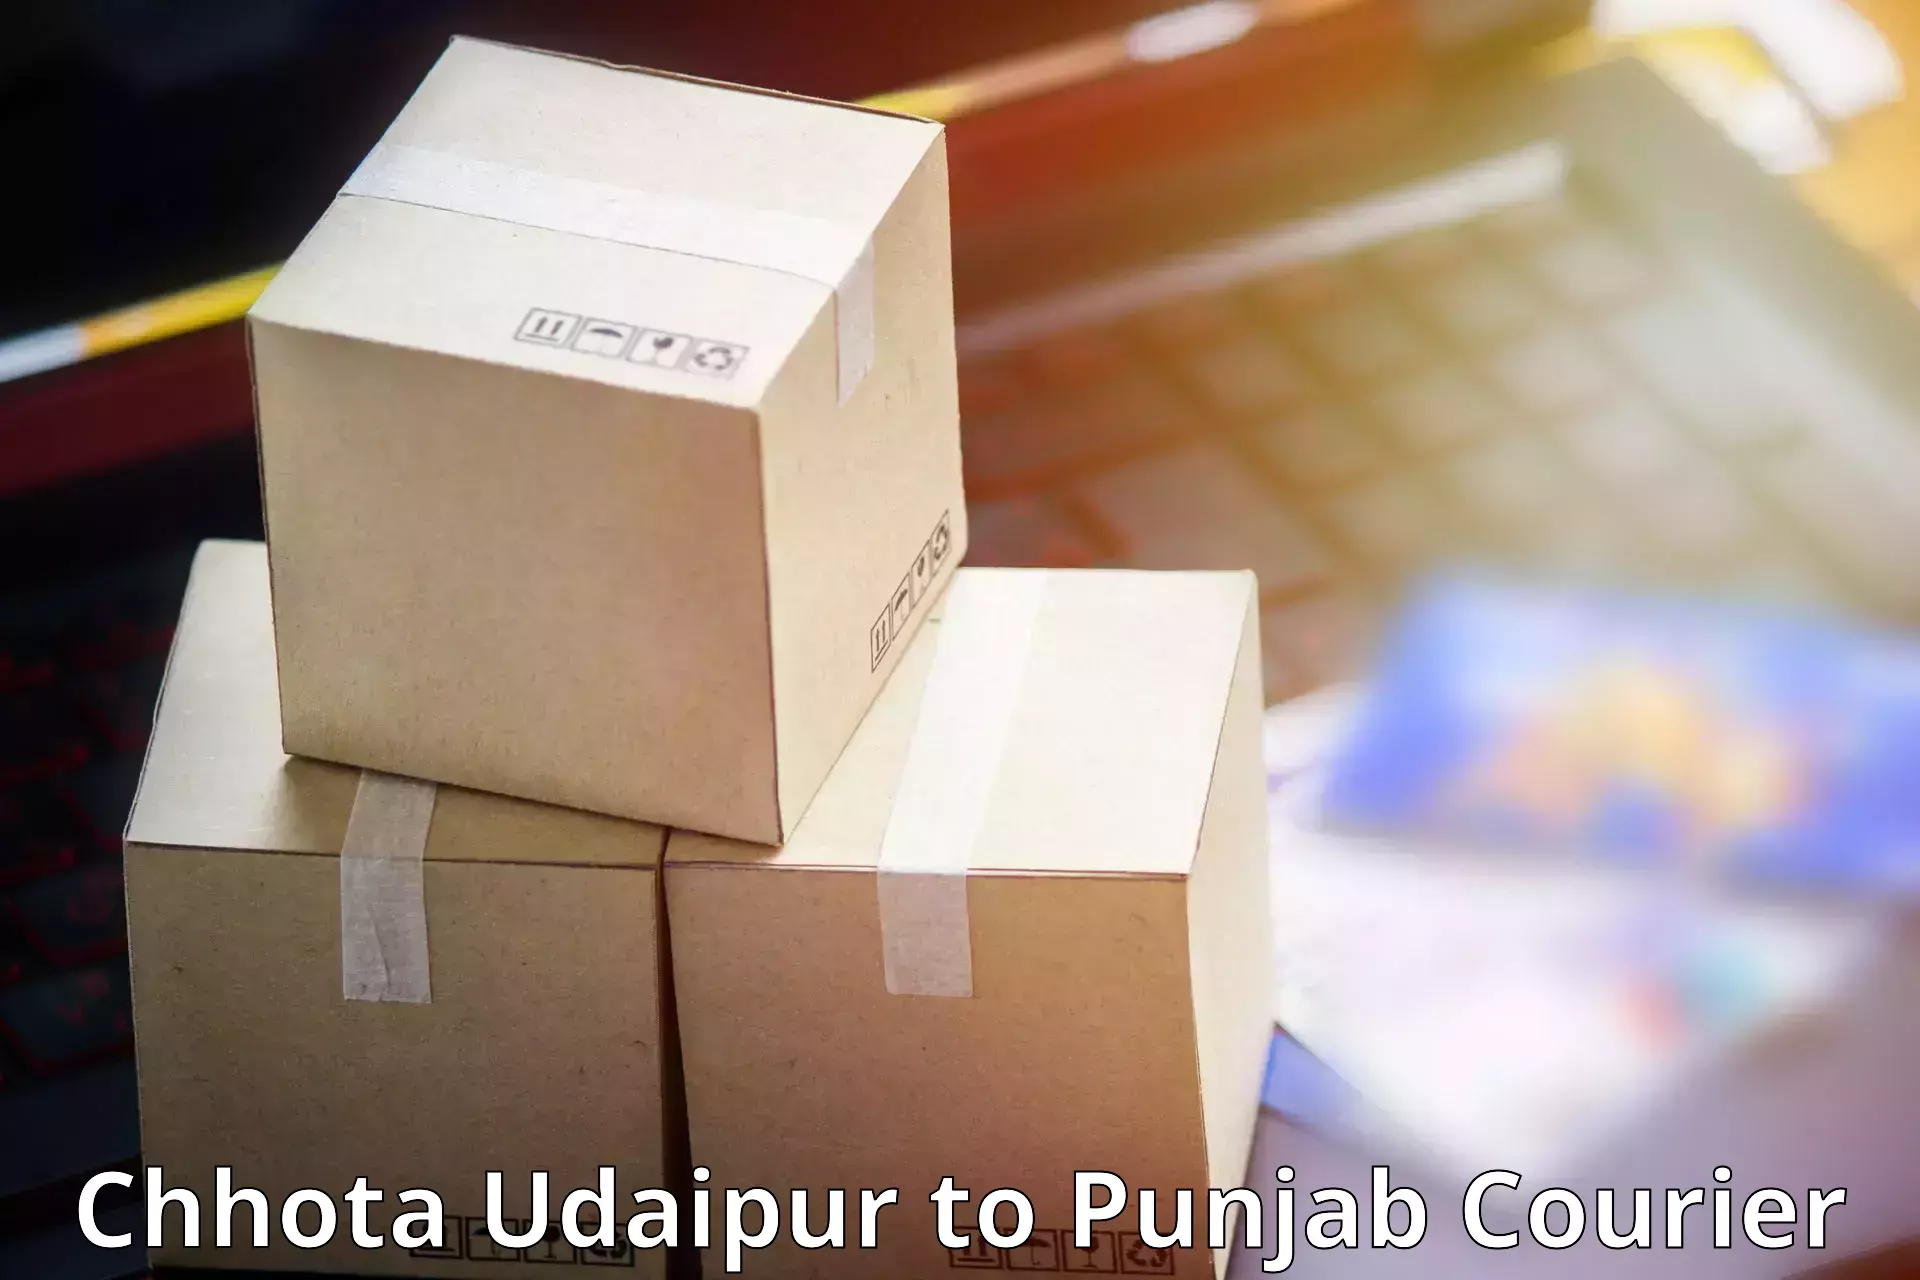 Quality courier services Chhota Udaipur to Mehta Chowk